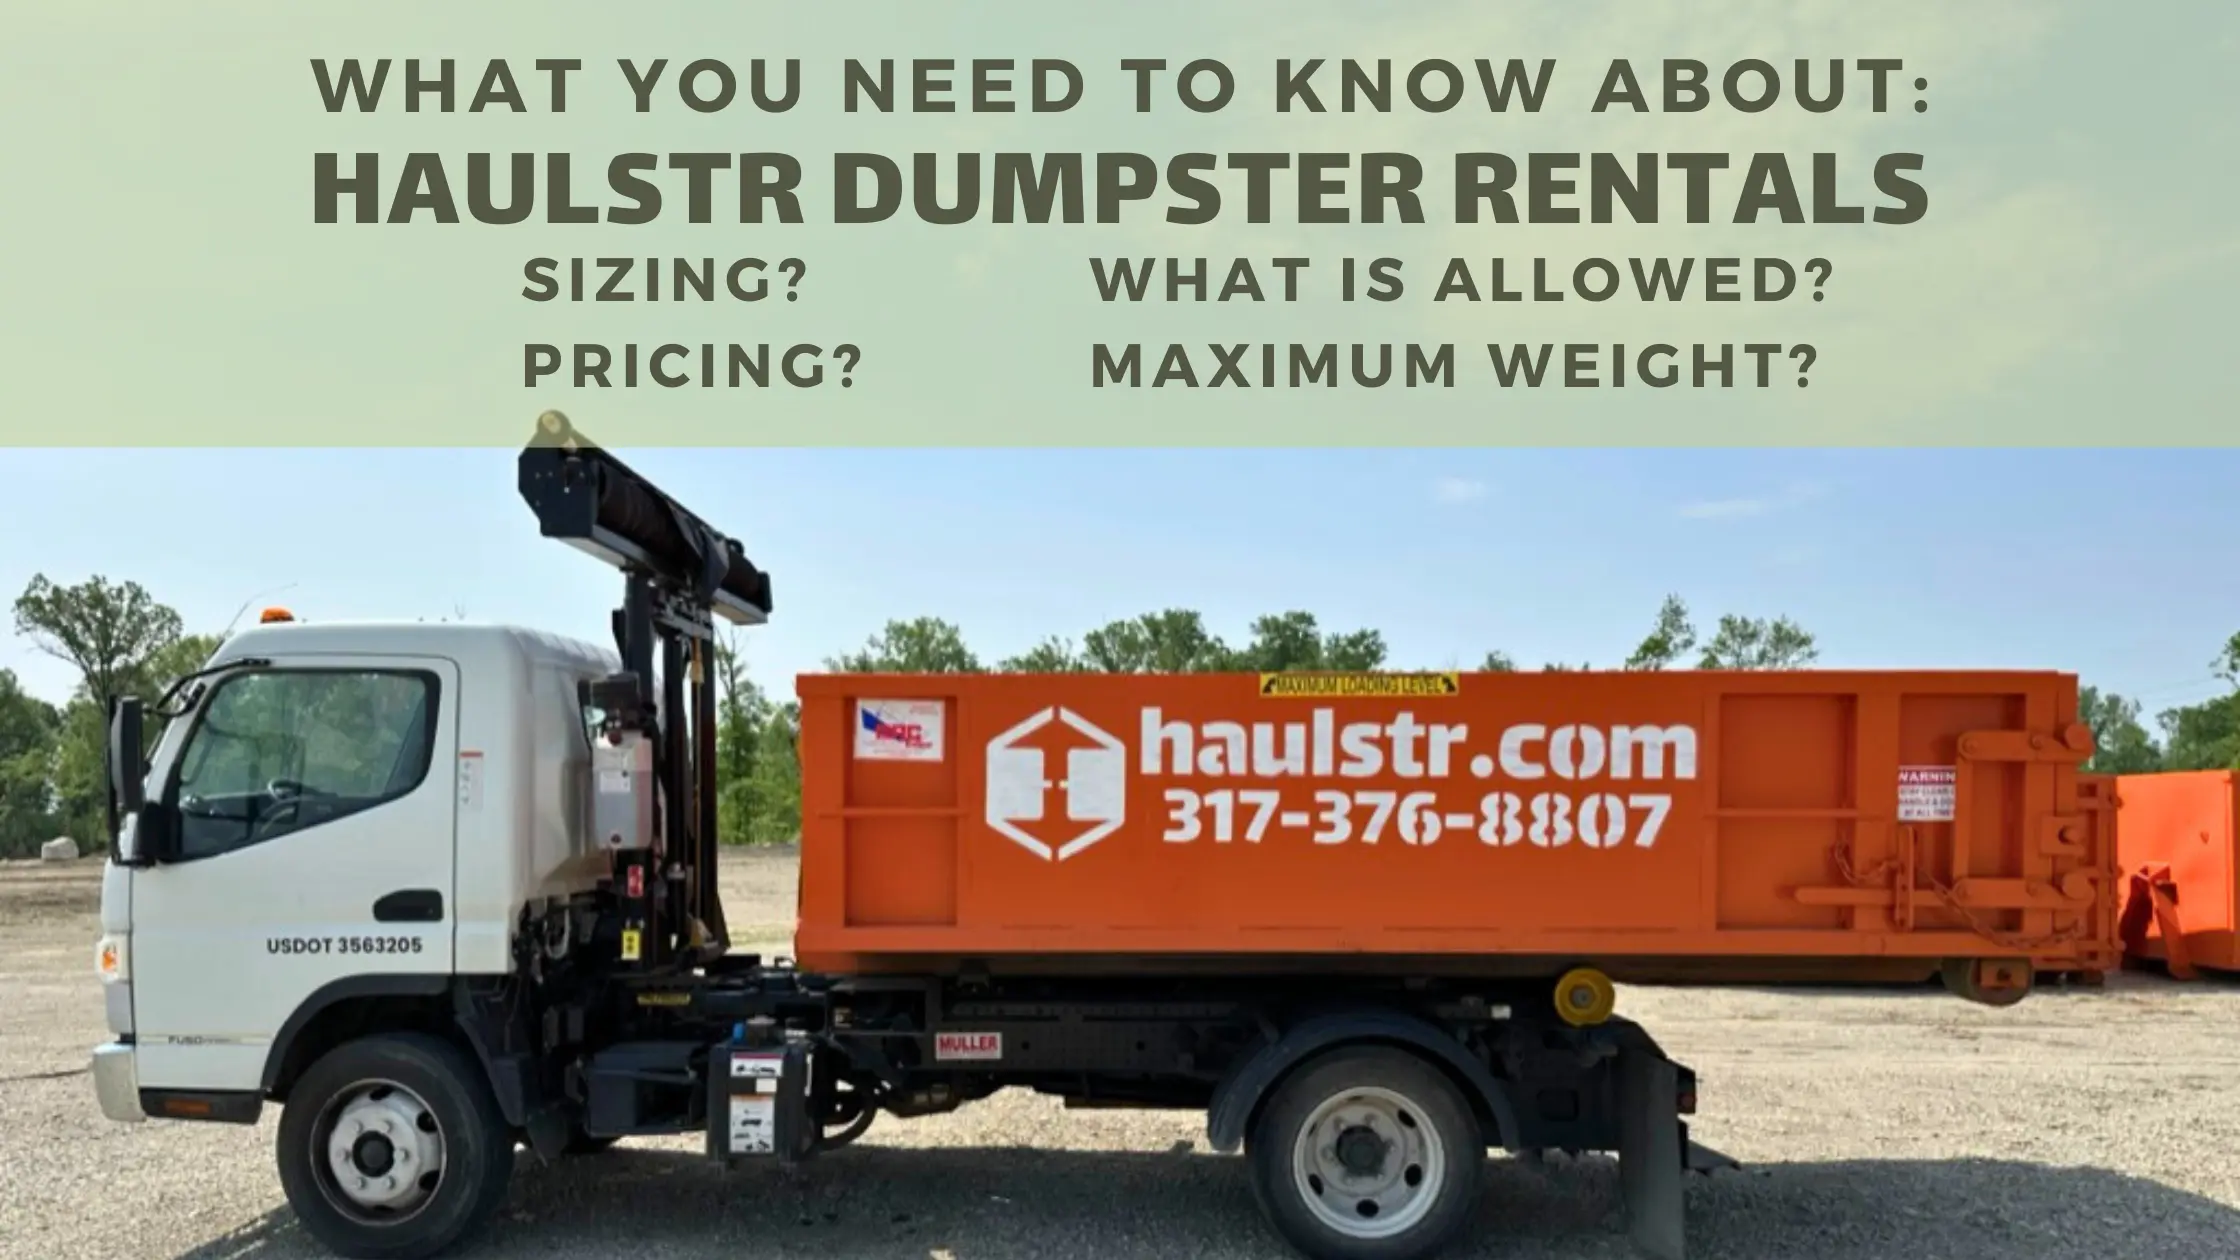 Haulstr Dumpster Rentals What You Need to Know About: SIZING? PRICING? What is allowed? Maximum Weight?